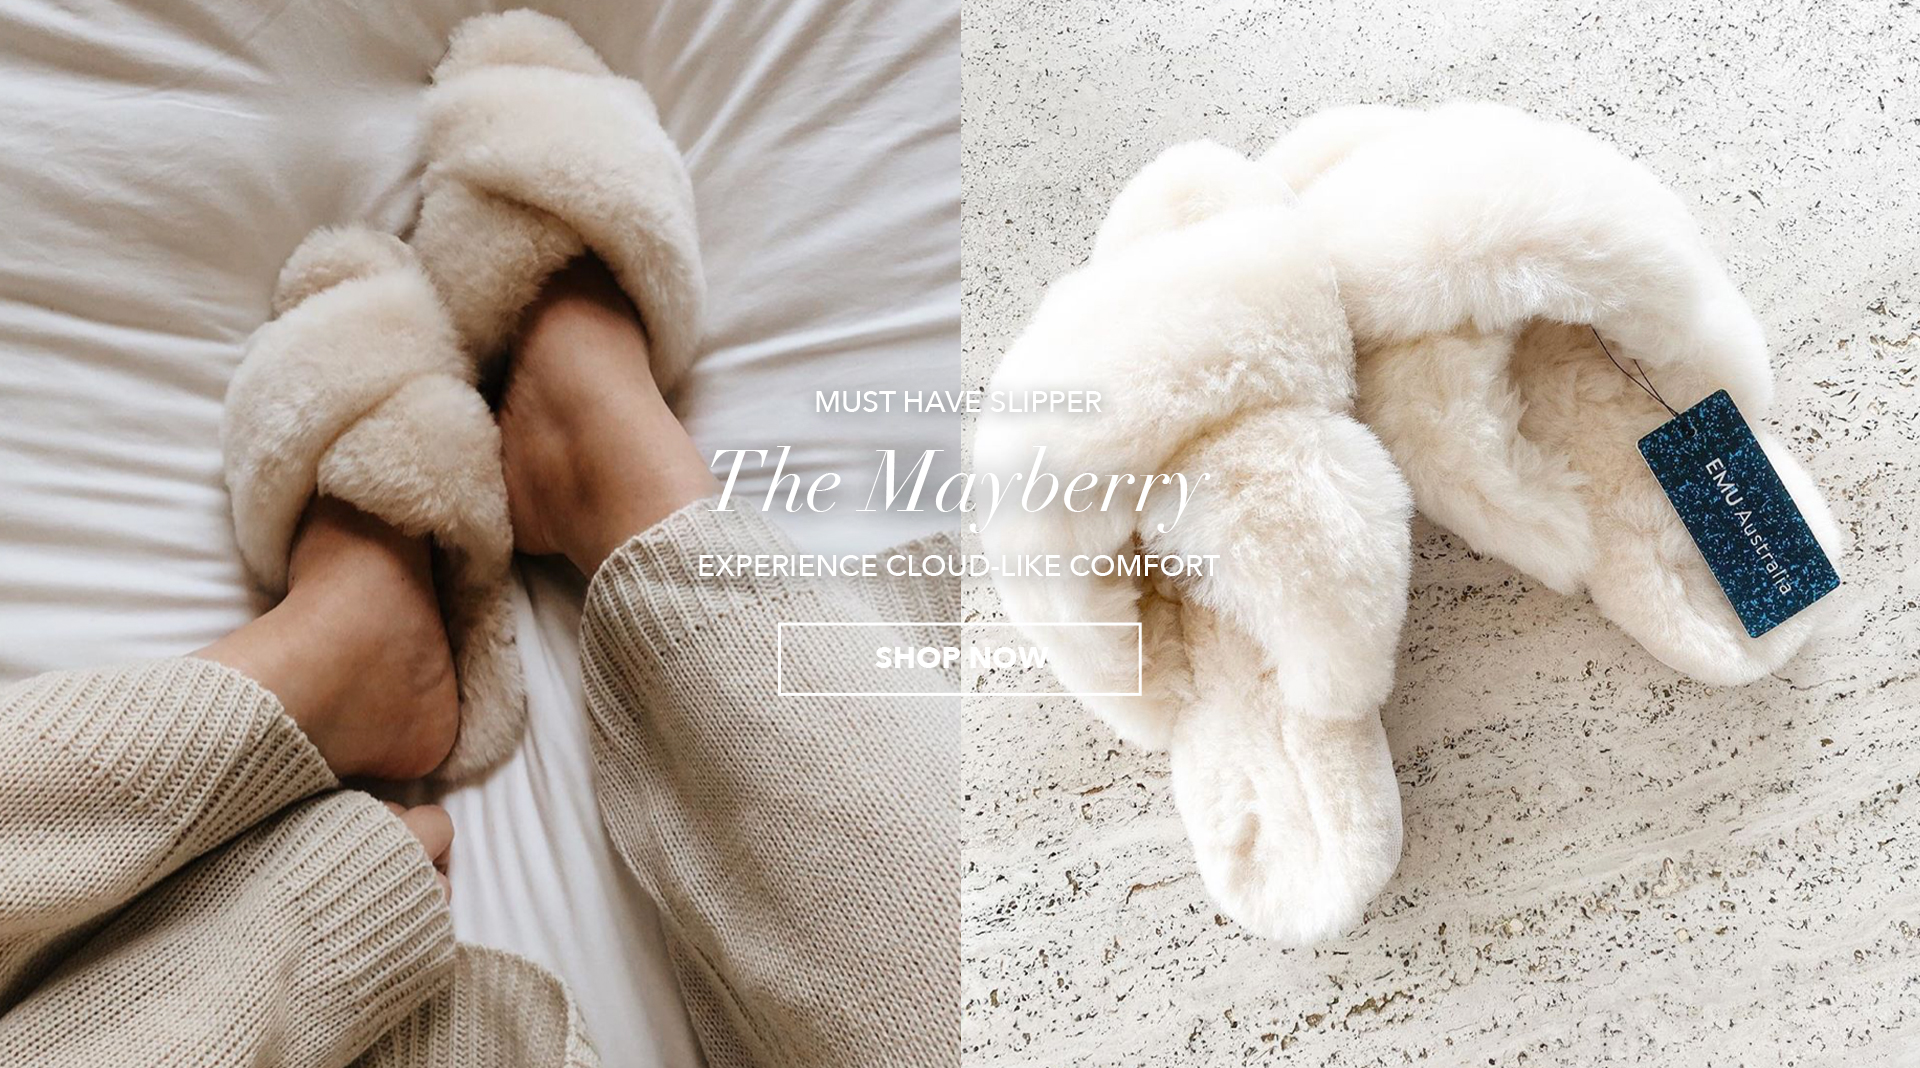 Girl wearing Mayberry sheepskin slippers. Must-have slipper: The Mayberry. Experience cloud-like comfort. Shop Now.